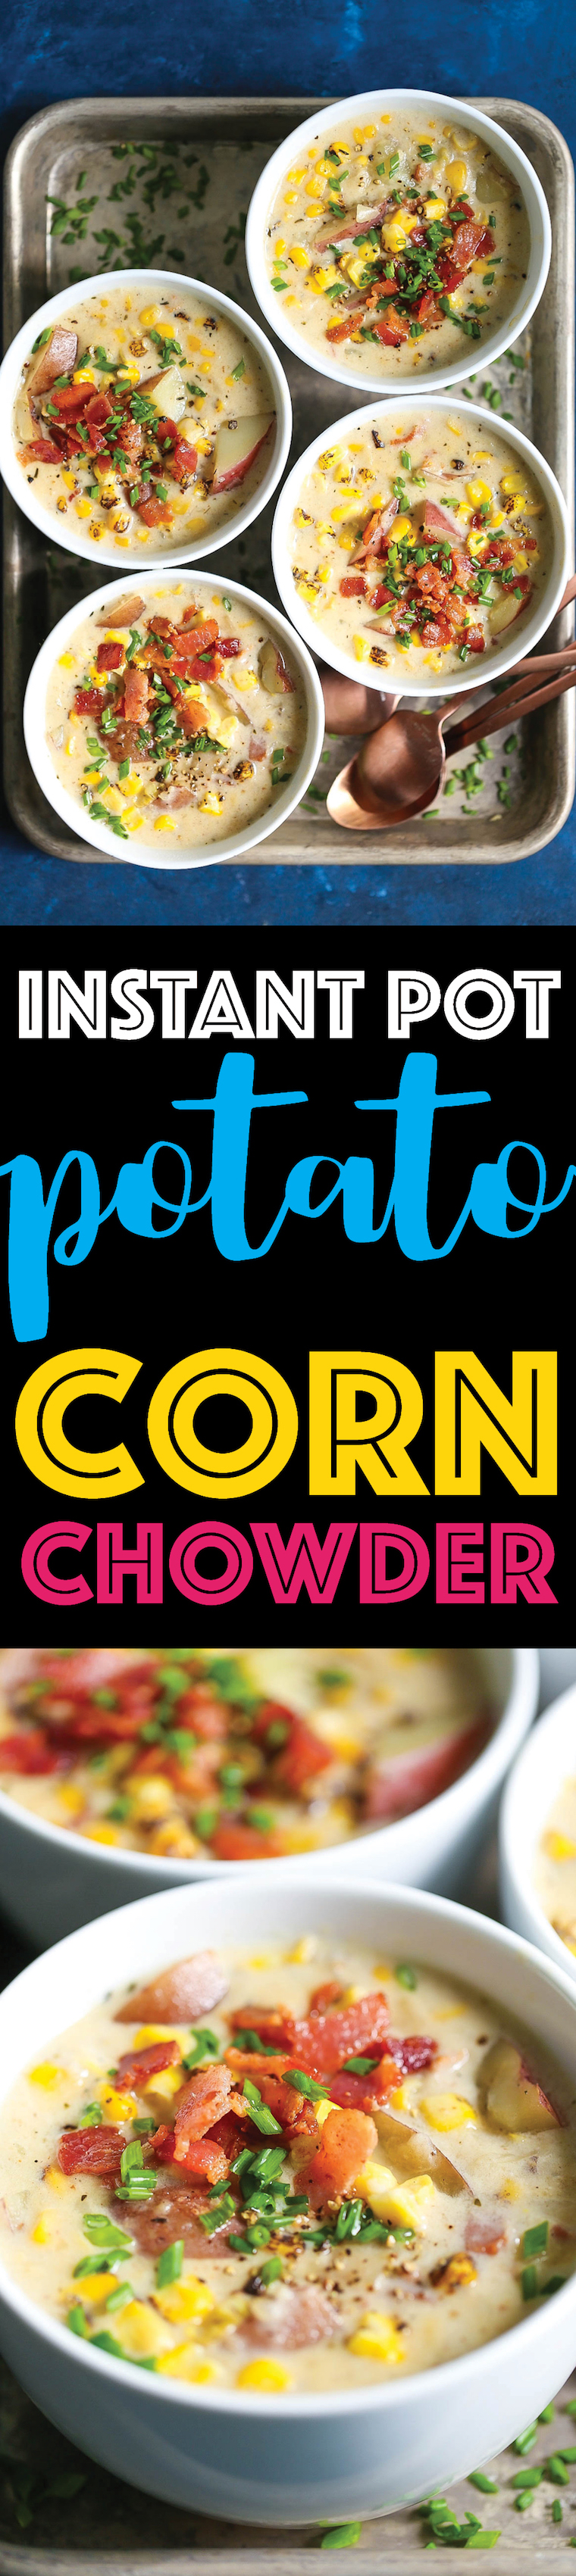 Instant Pot Potato Corn Chowder - So hearty, cozy and creamy – perfect for those cold nights! And it’s made right in your pressure cooker so effortlessly! It’s comfort food at it’s easiest!